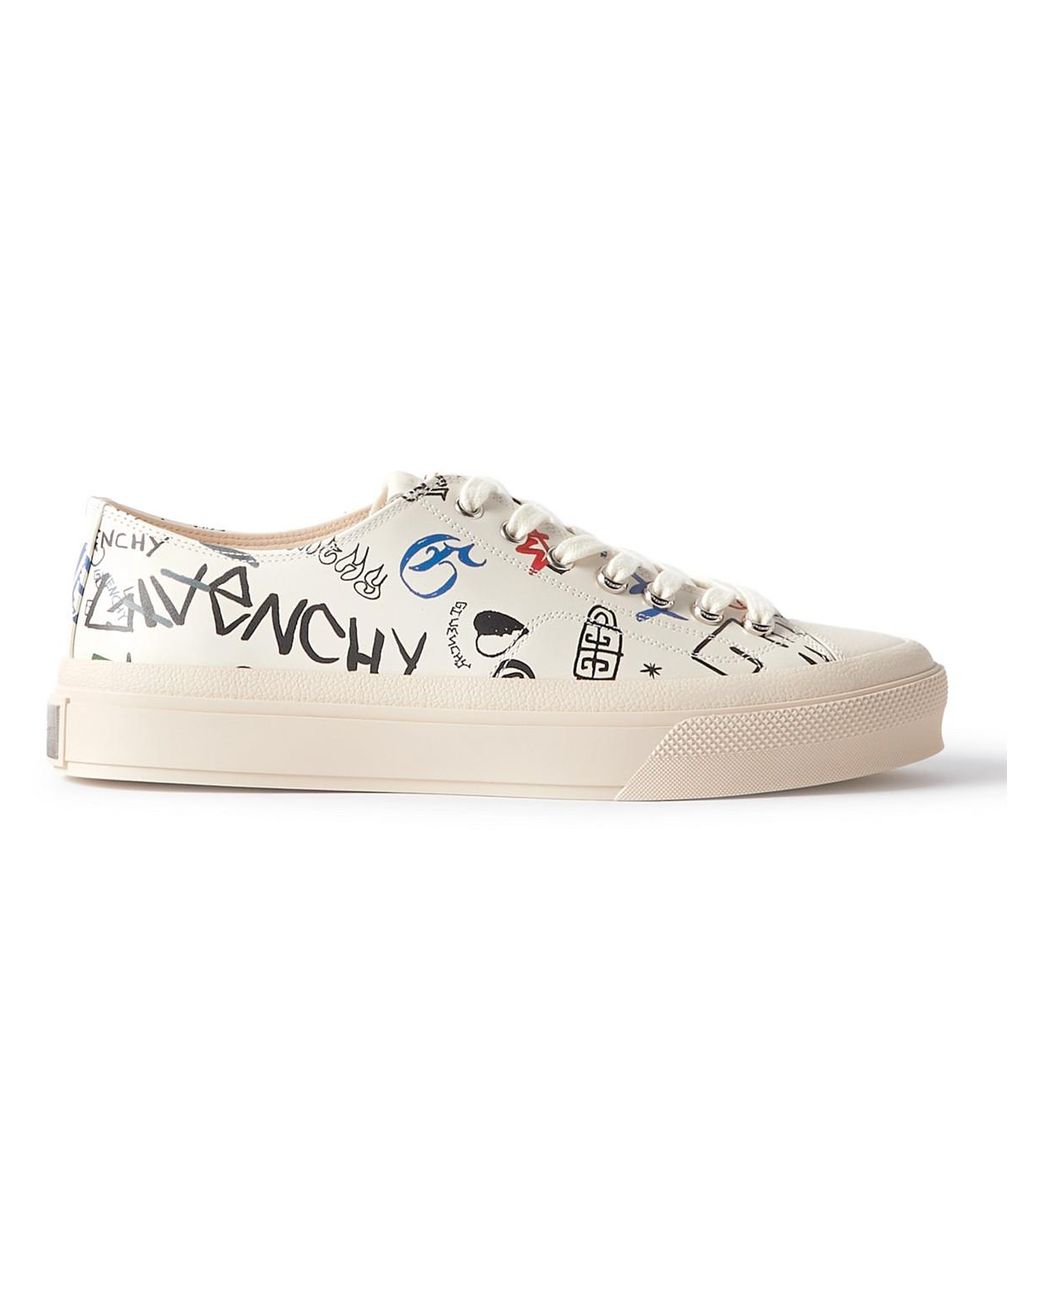 GIVENCHY Outlet: sneakers in canvas - White | GIVENCHY sneakers H29085  online at GIGLIO.COM